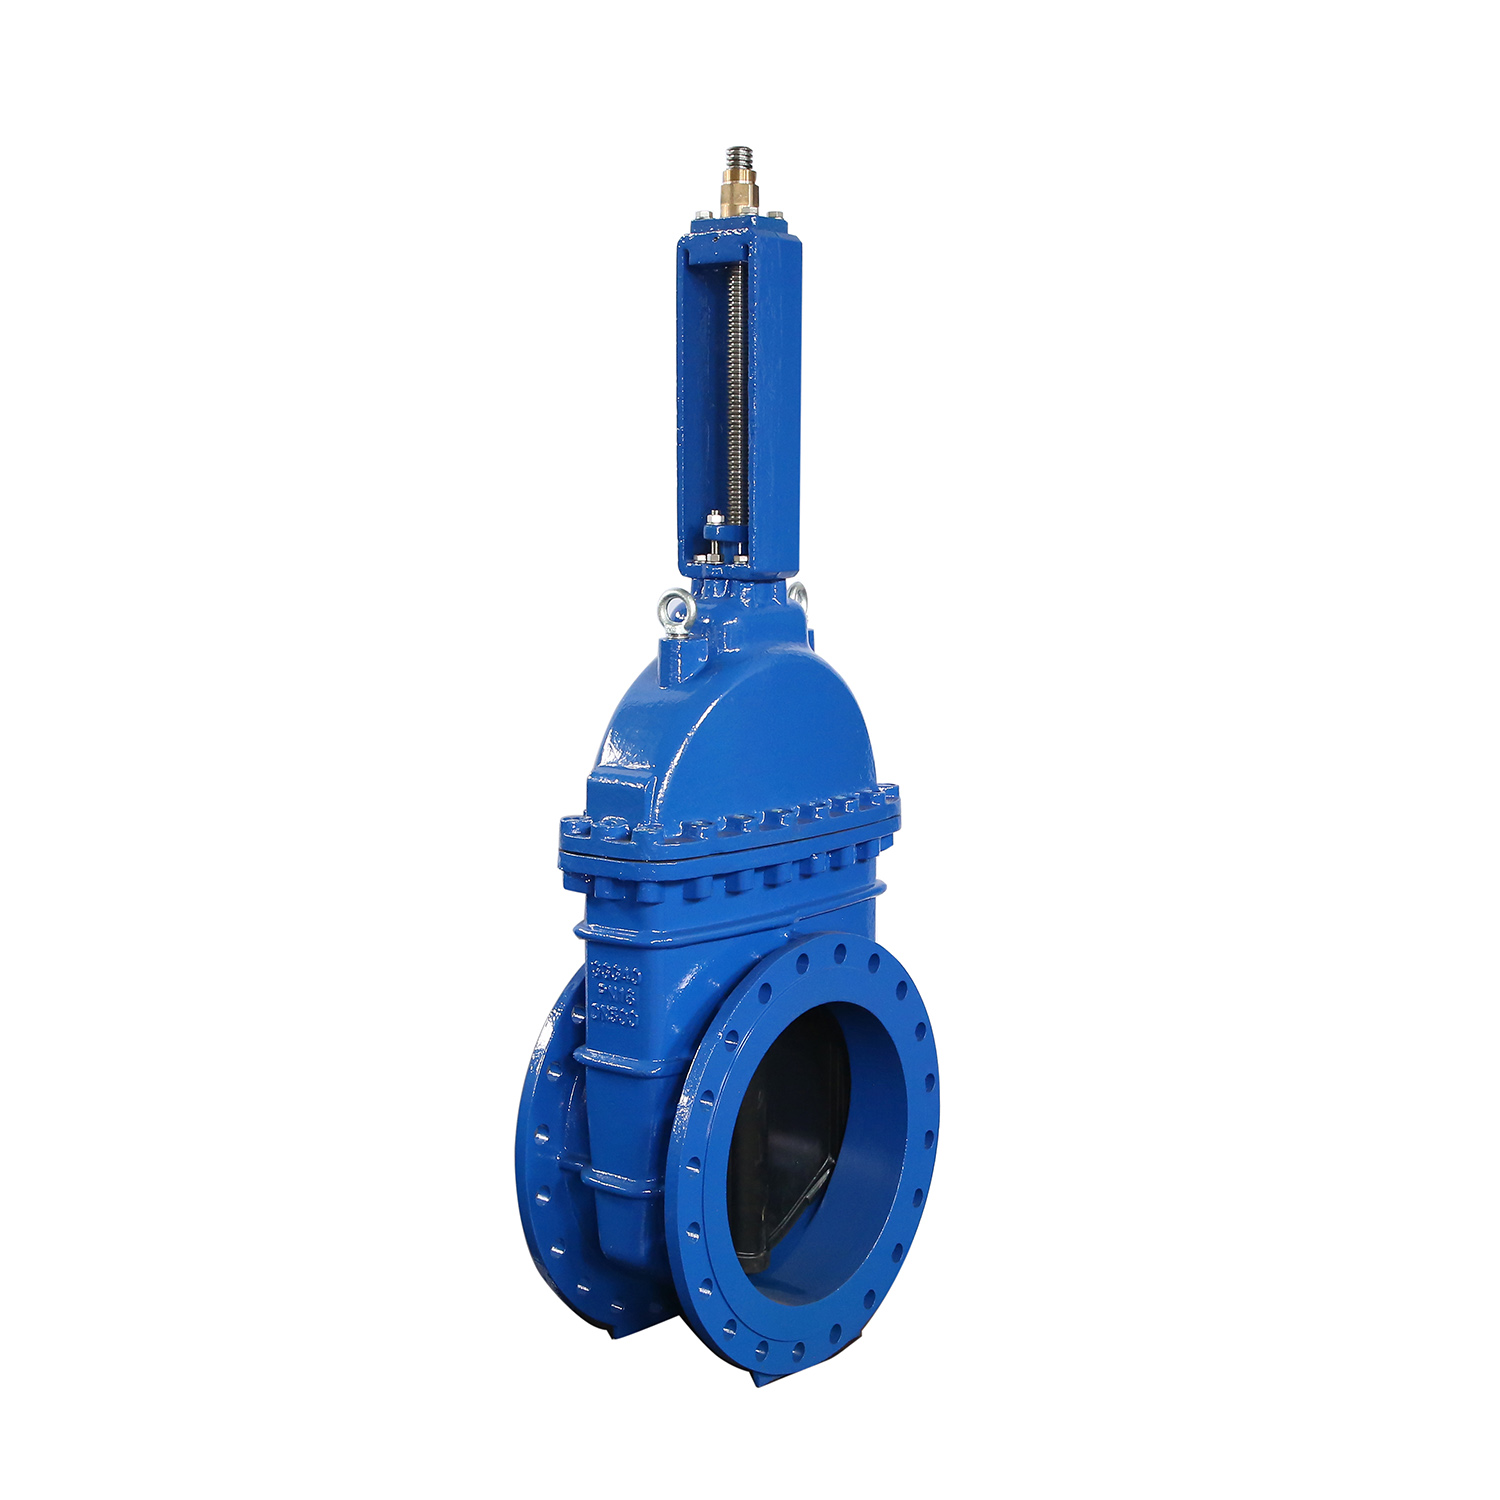 17.Soft seal ( resilient seat) gate valve